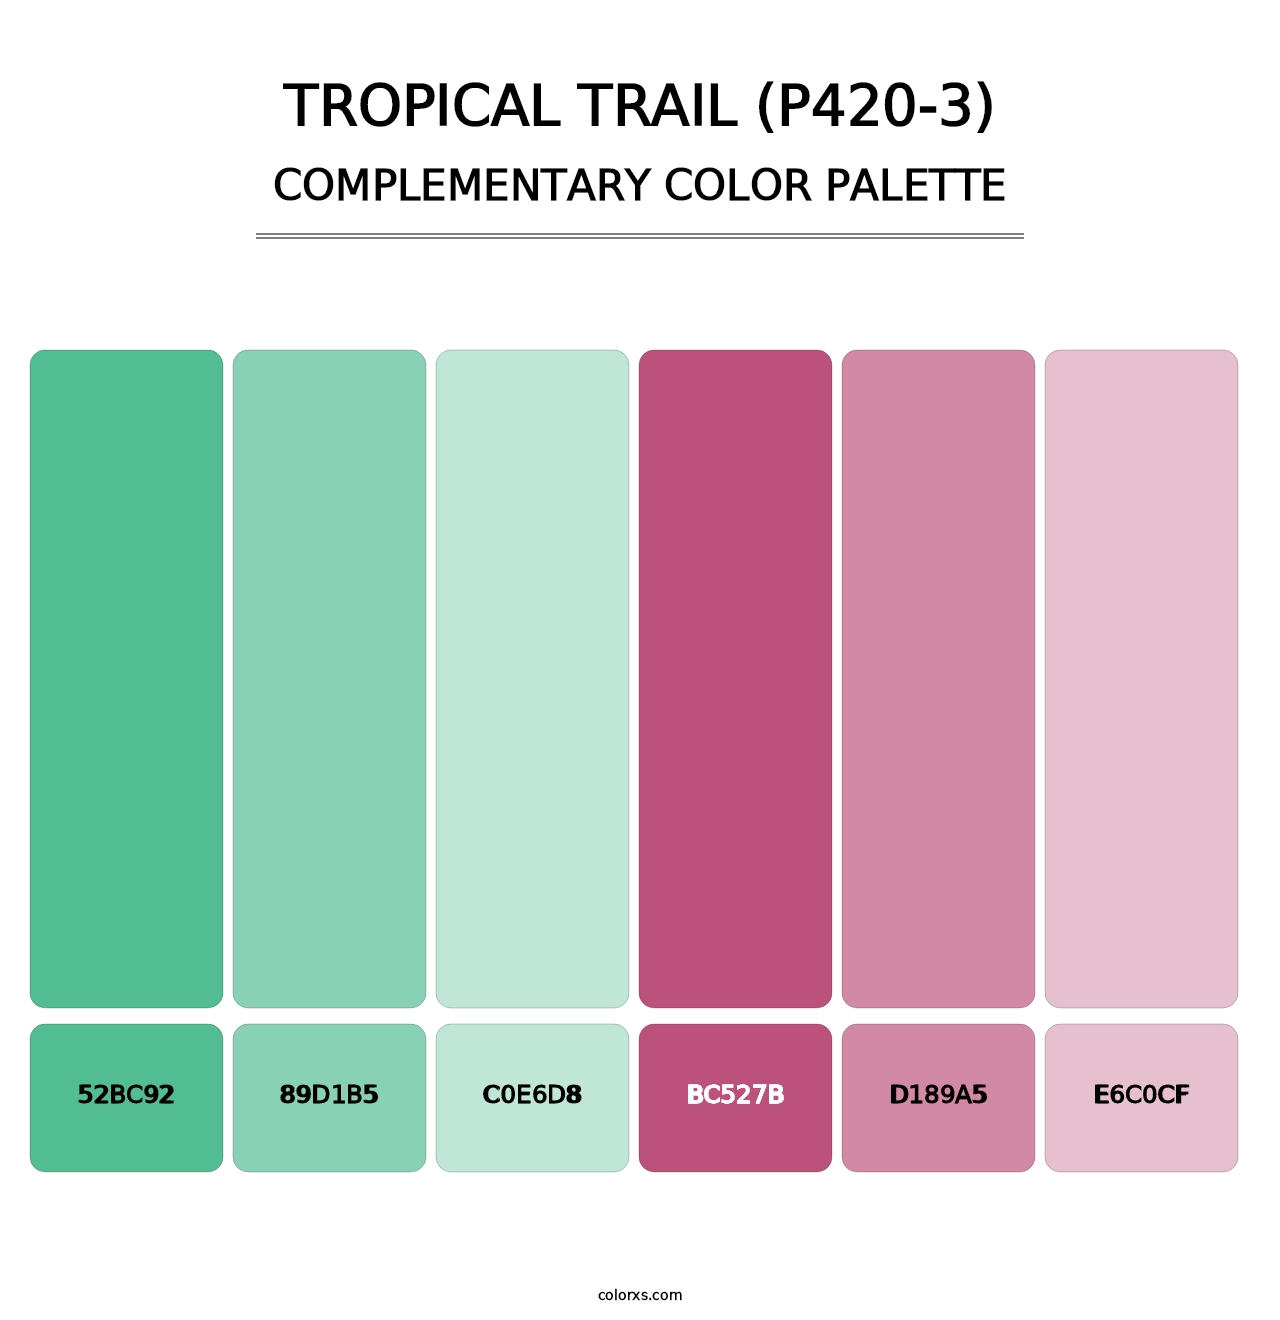 Tropical Trail (P420-3) - Complementary Color Palette